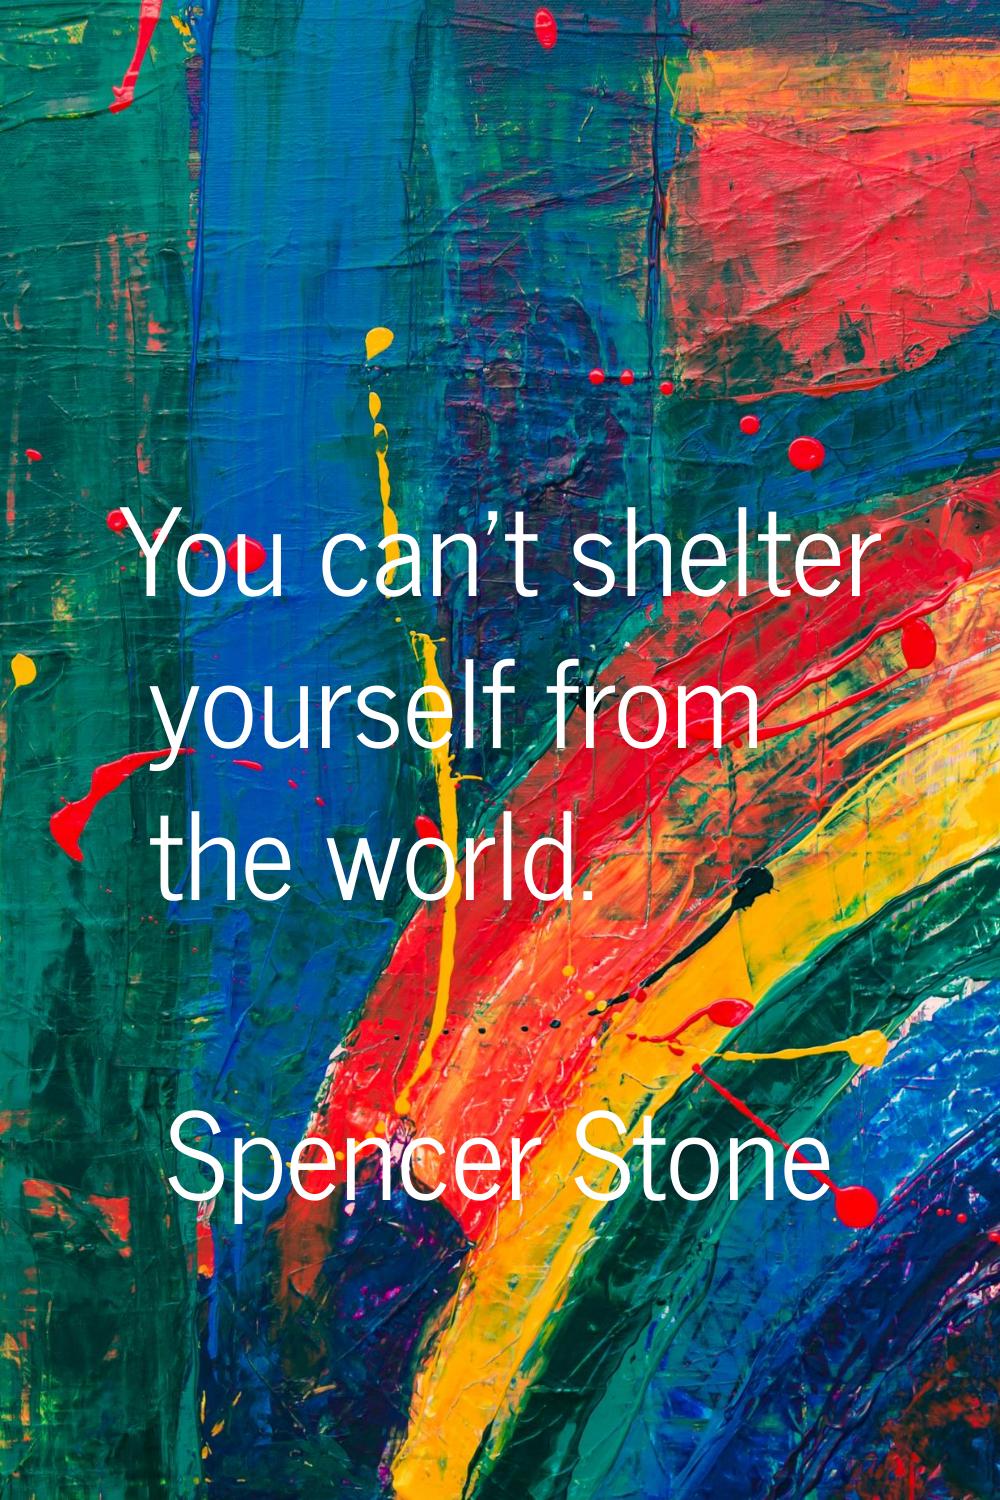 You can't shelter yourself from the world.